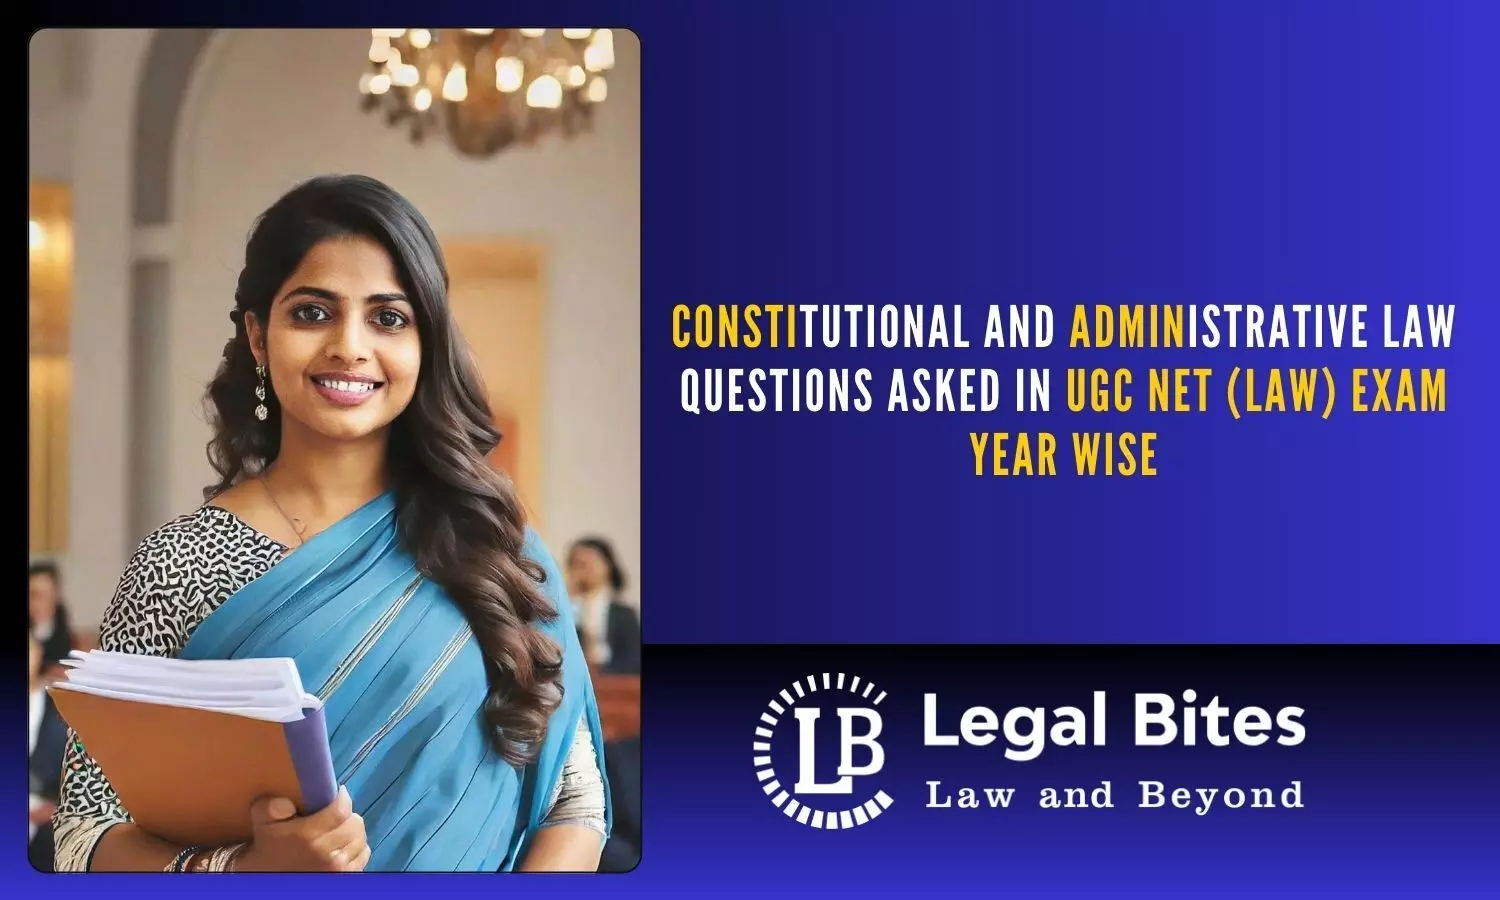 Constitutional and Administrative Law Questions Asked in UGC NET Exam | UGC NET (Law) #Special